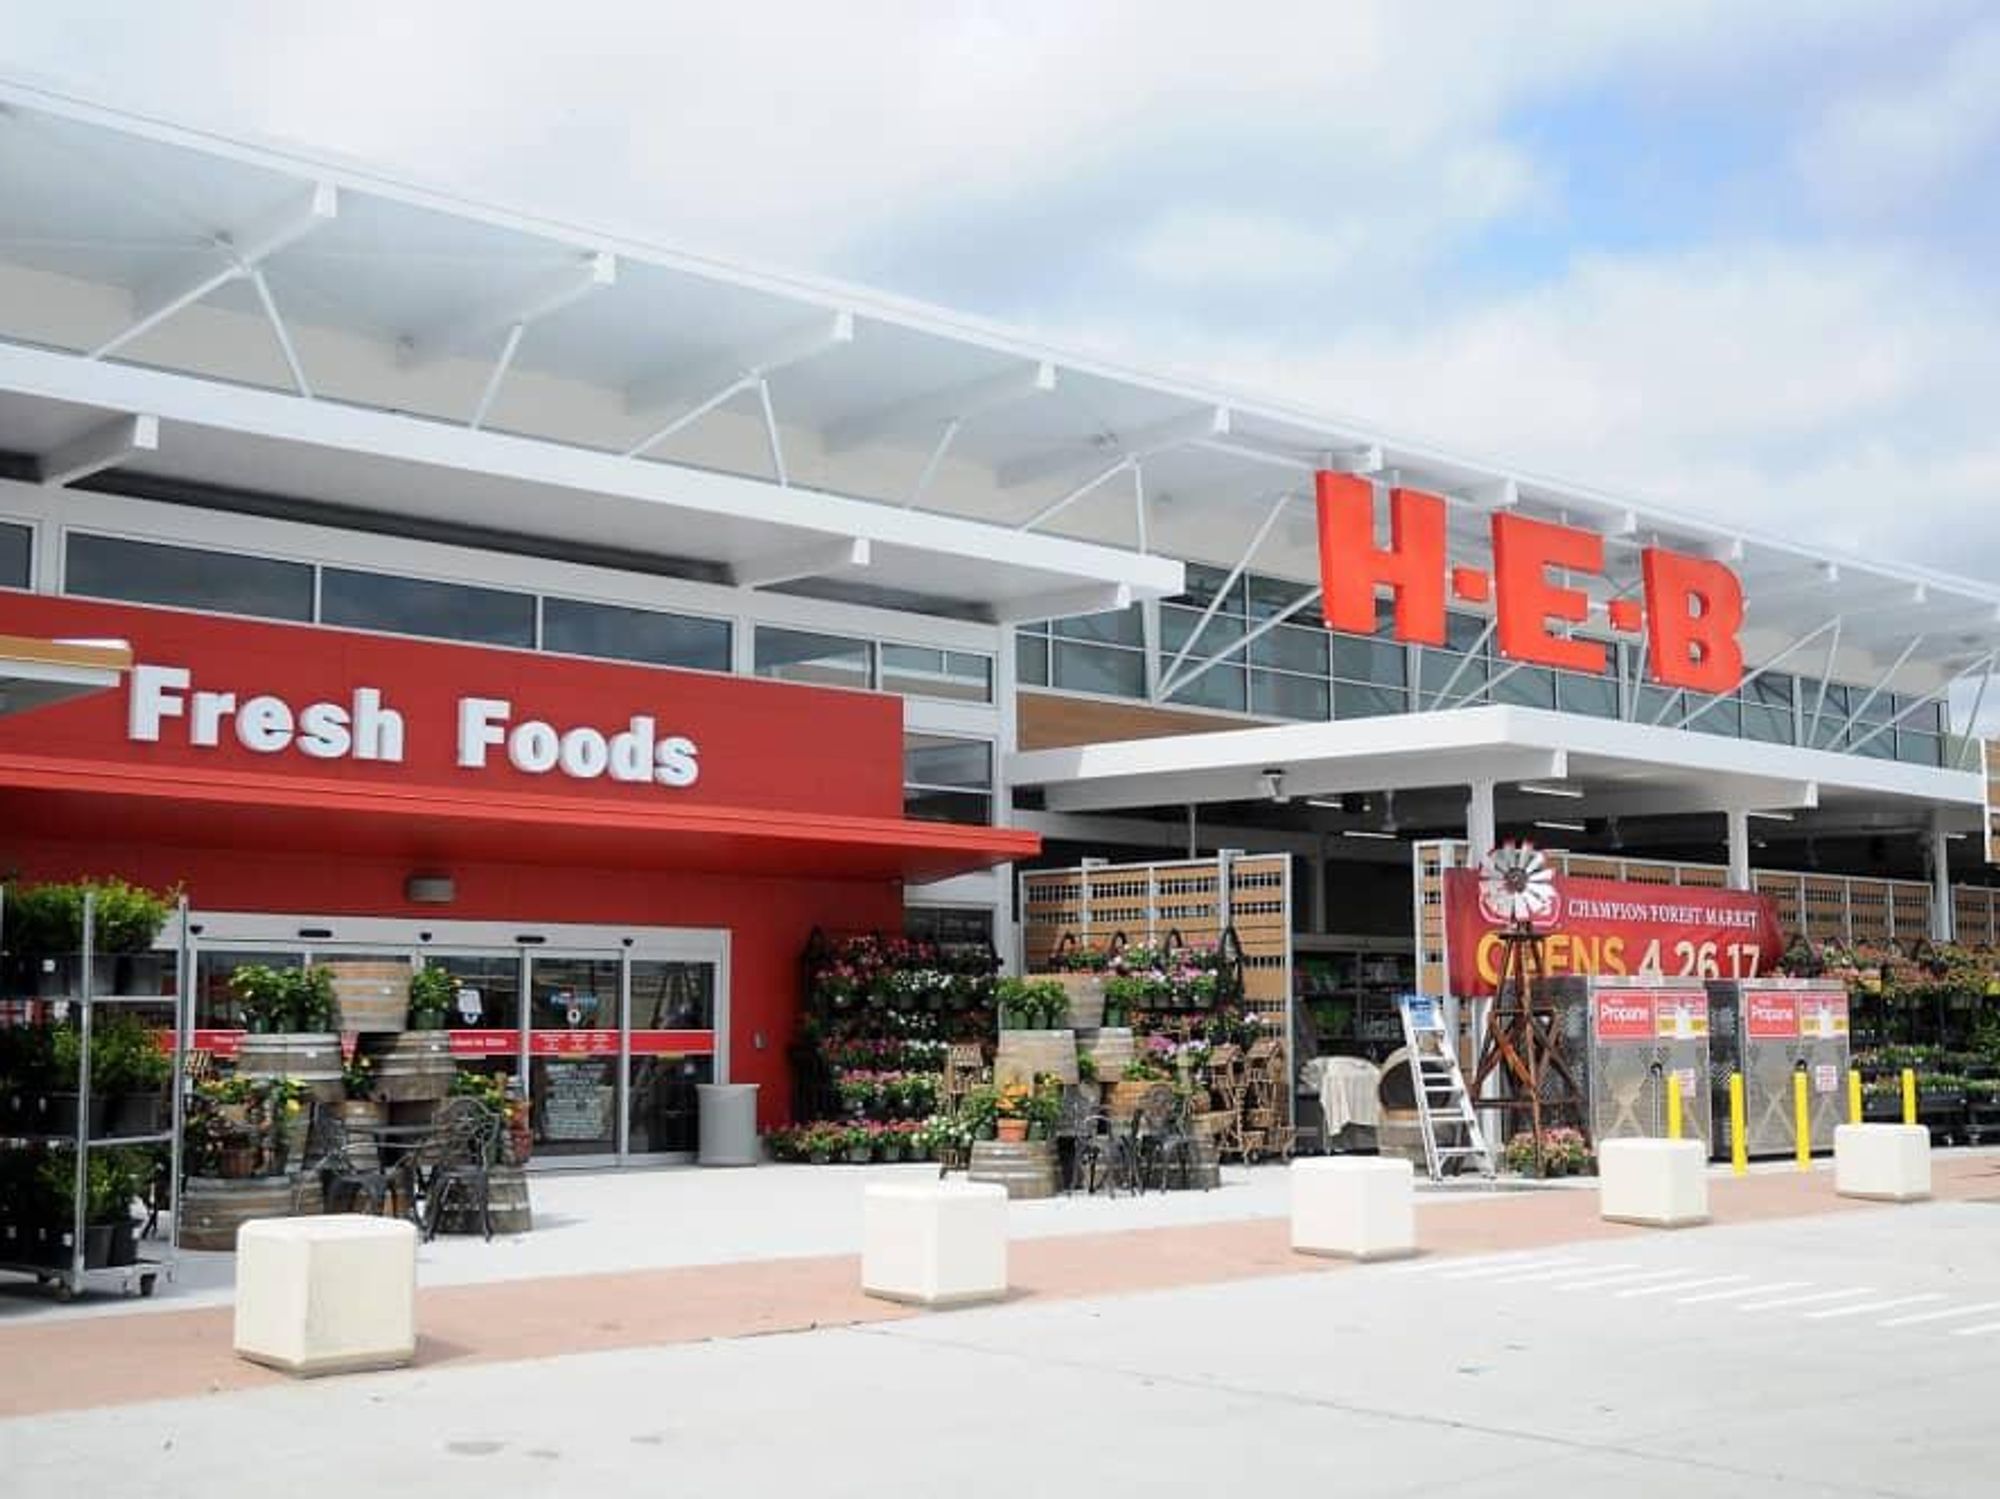 H-E-B grocery store front logo sign